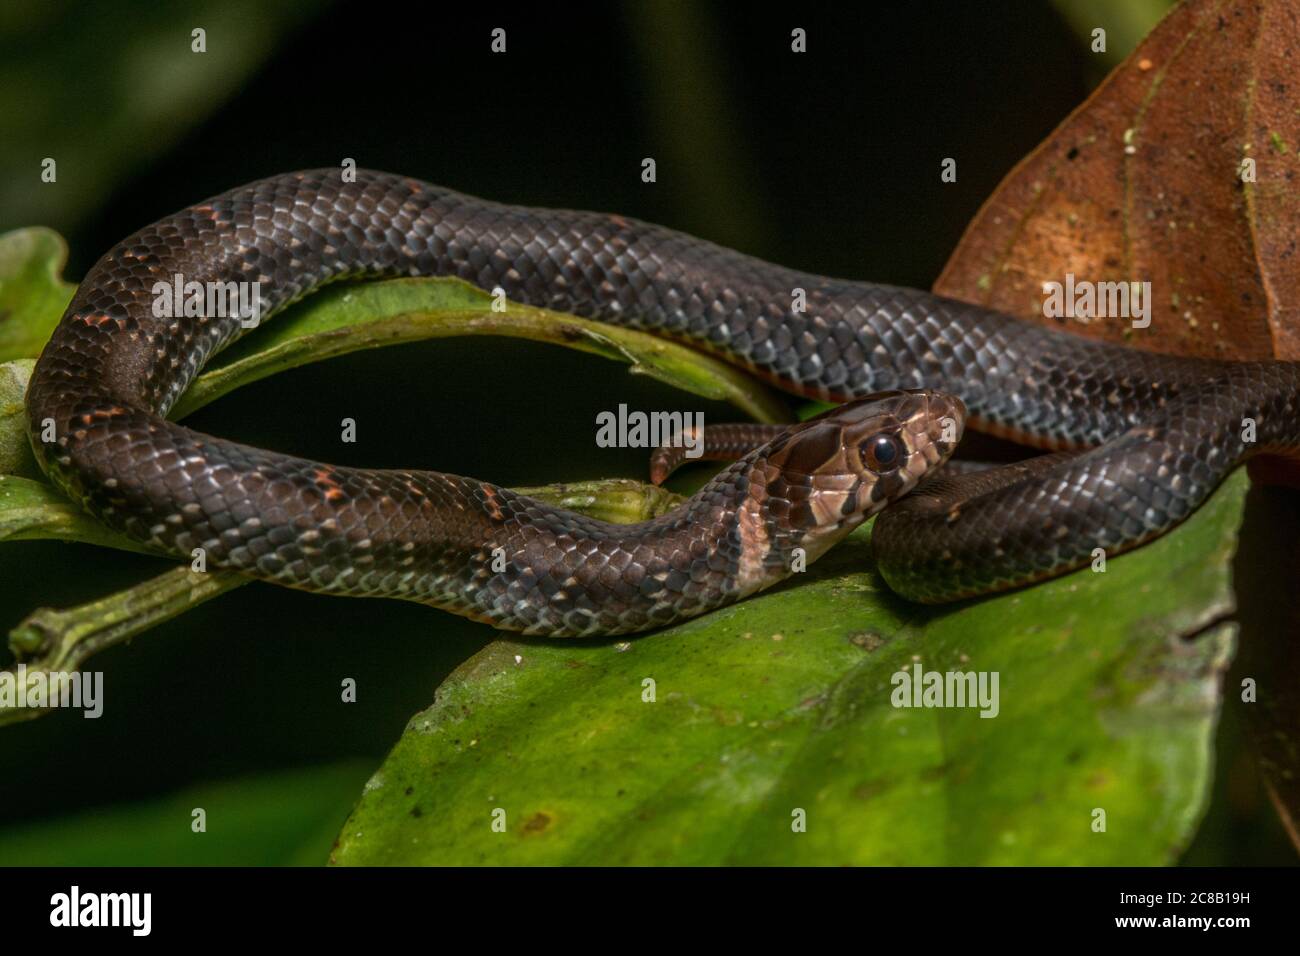 Jeweled Kukri Snake (Oligodon everetti) a small nonvenomous species of snake that lives in the rainforest of Borneo. Stock Photo